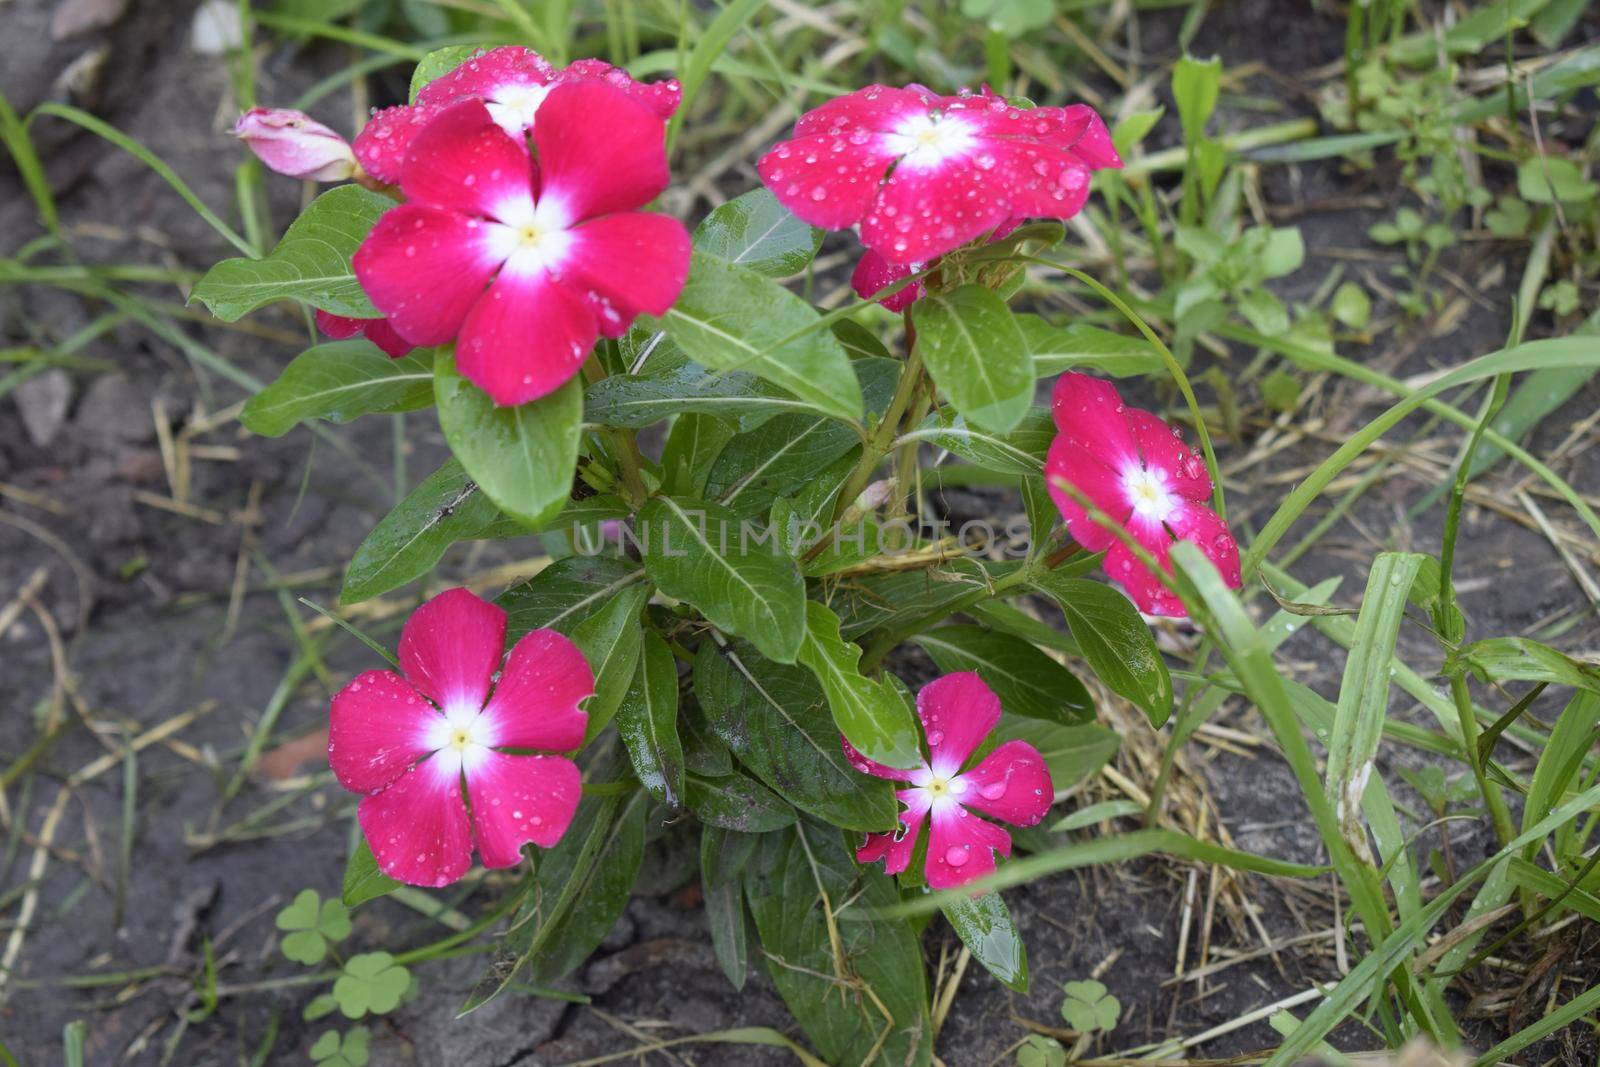 Group of pink petunia flower in the garden. Colourful petunia (Petunia hybrida) flowers